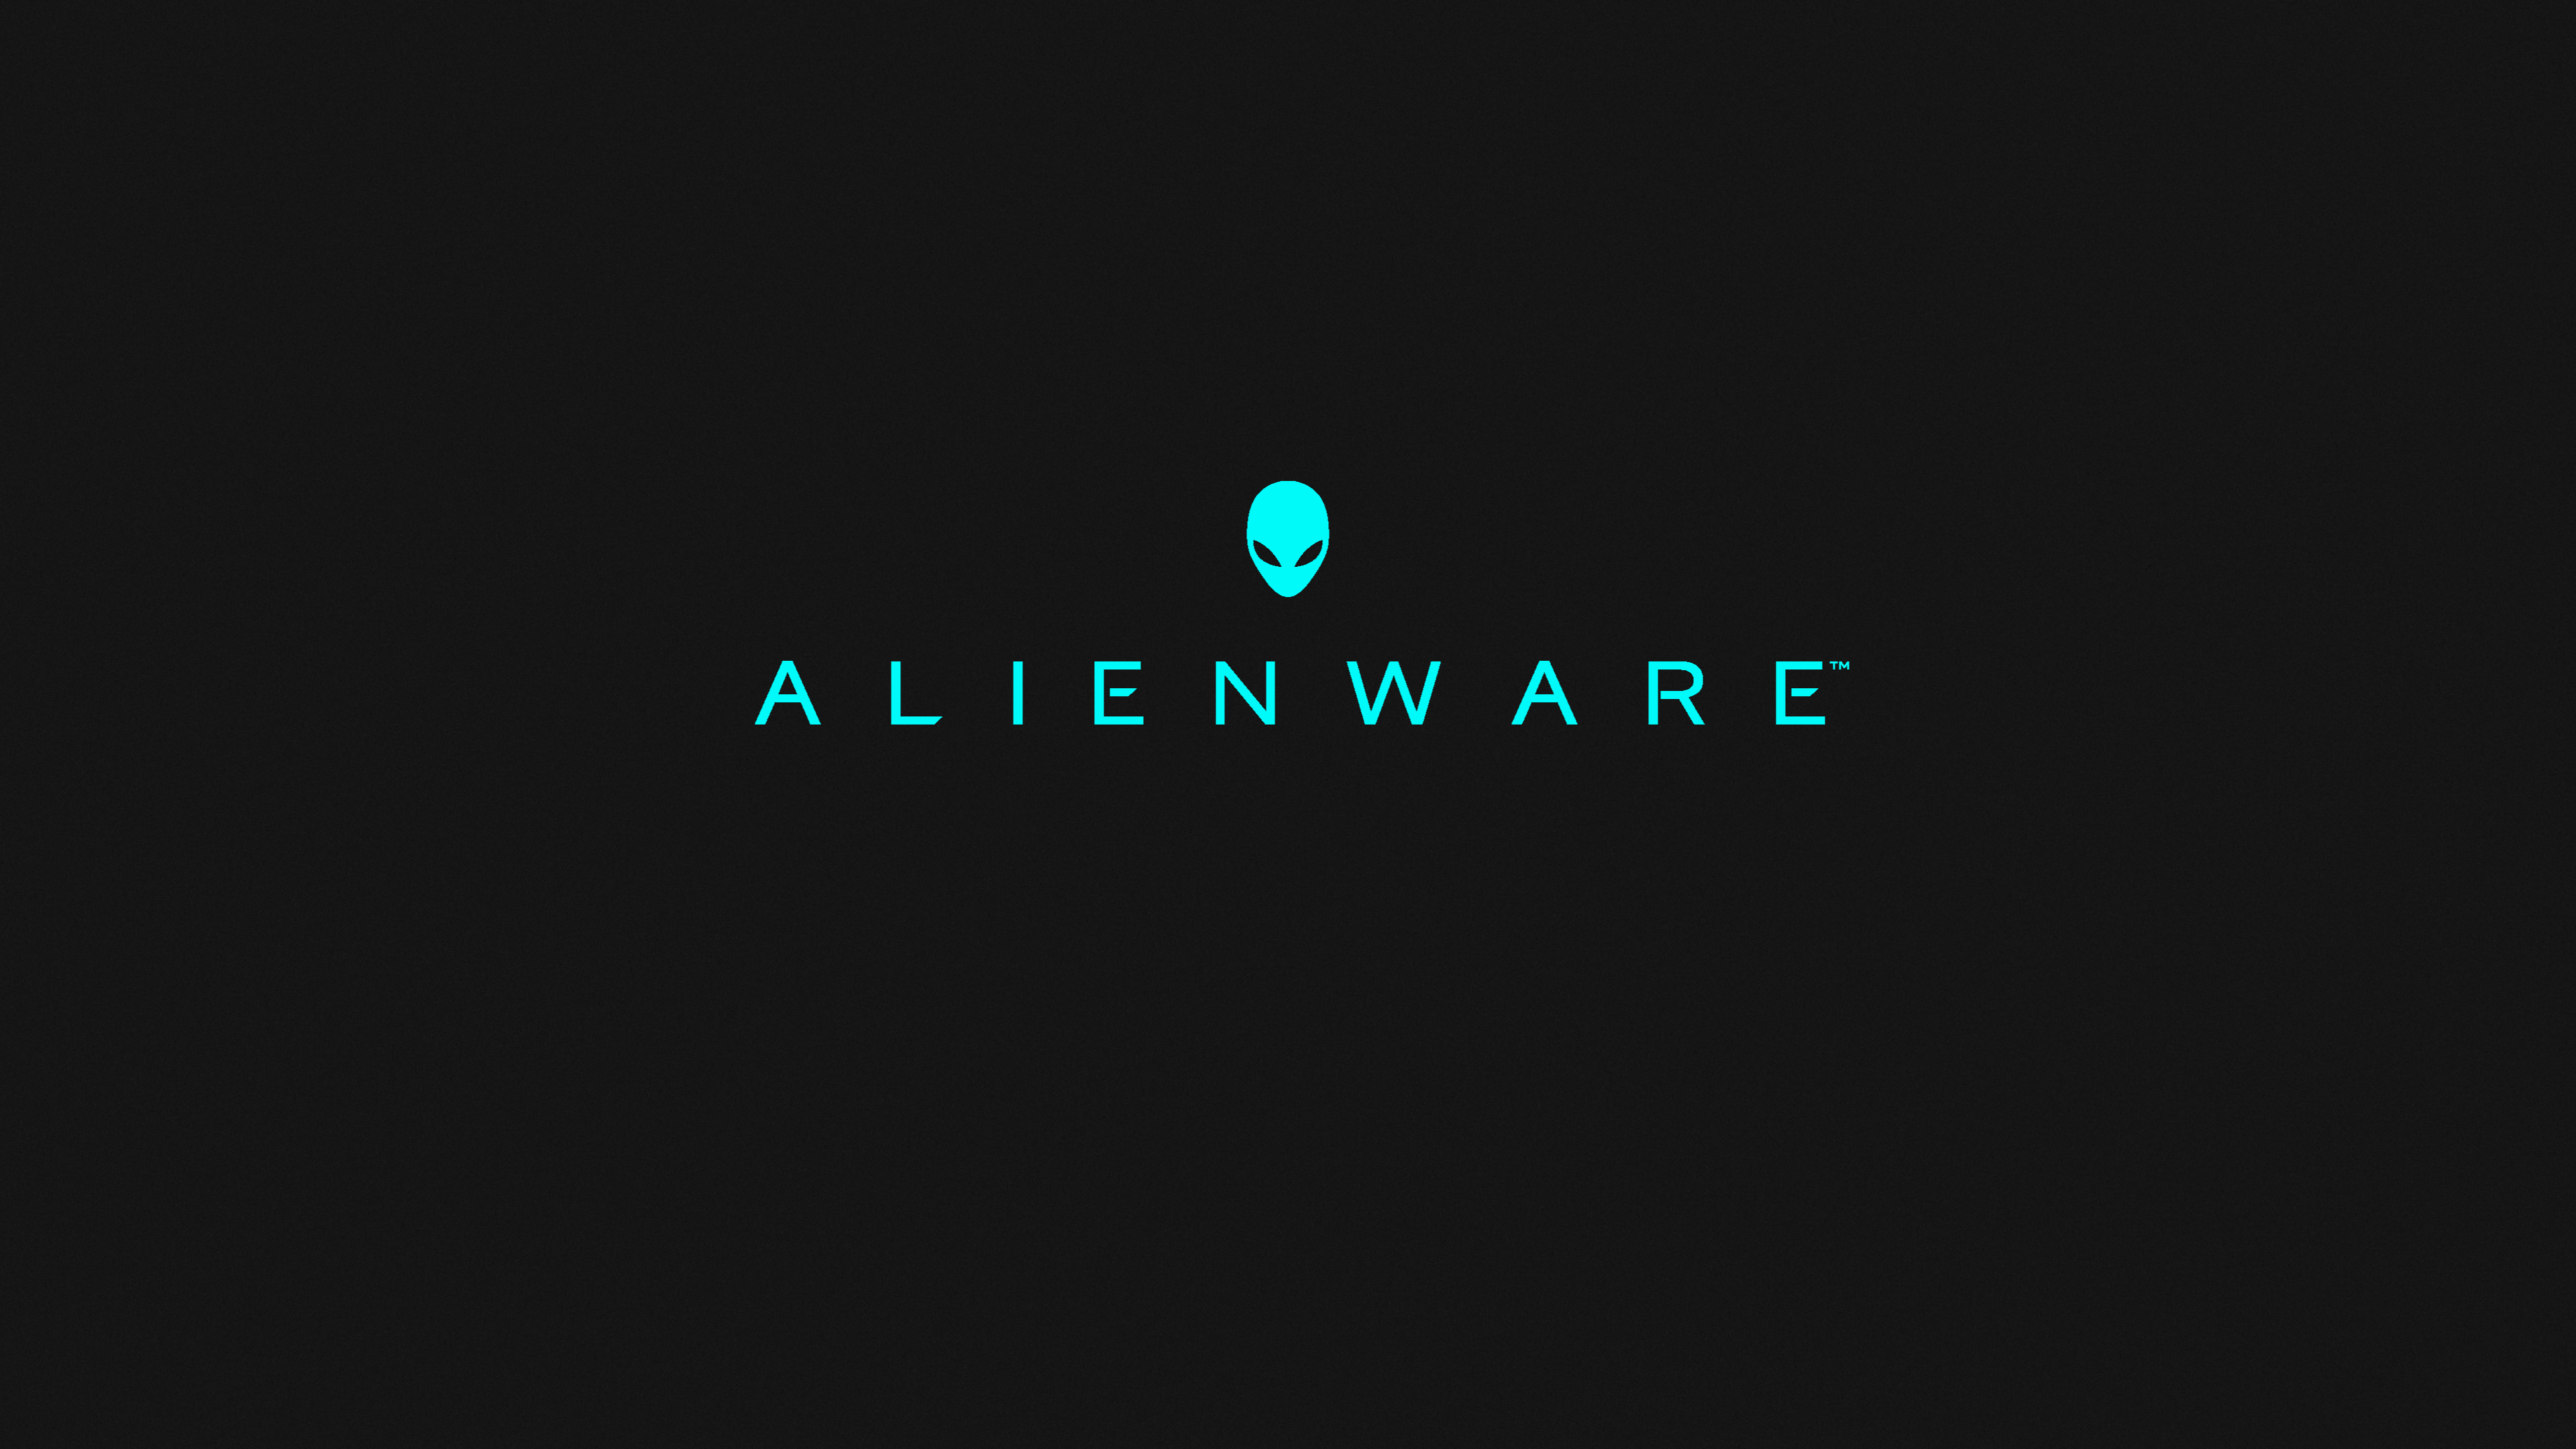 Made some minimal 4k wallpaper, since I cannot stand Alienware's own wallpaper. Feel free to DL